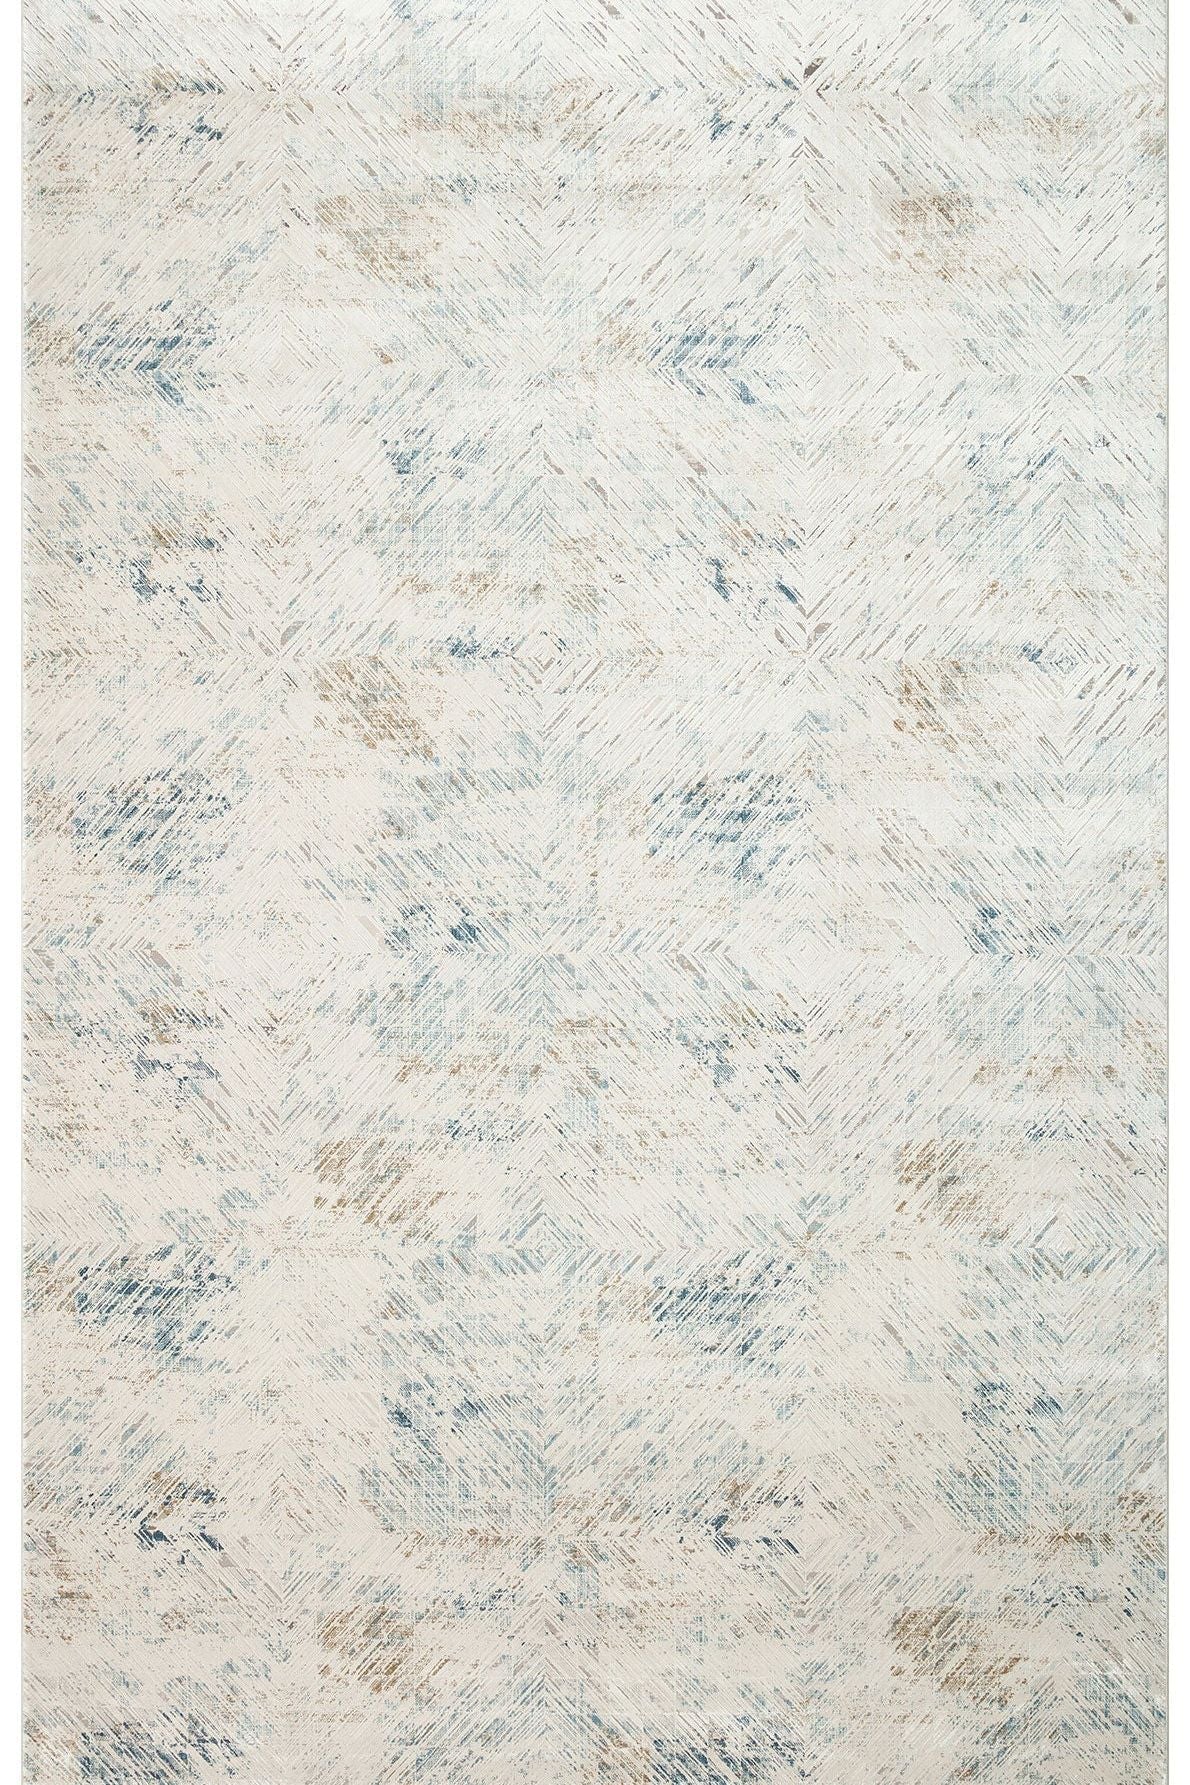 #Turkish_Carpets_Rugs# #Modern_Carpets# #Abrash_Carpets#High Density Woven Modern Made Carpet With Acrylic And ViscosePlm 03 Cream Blue